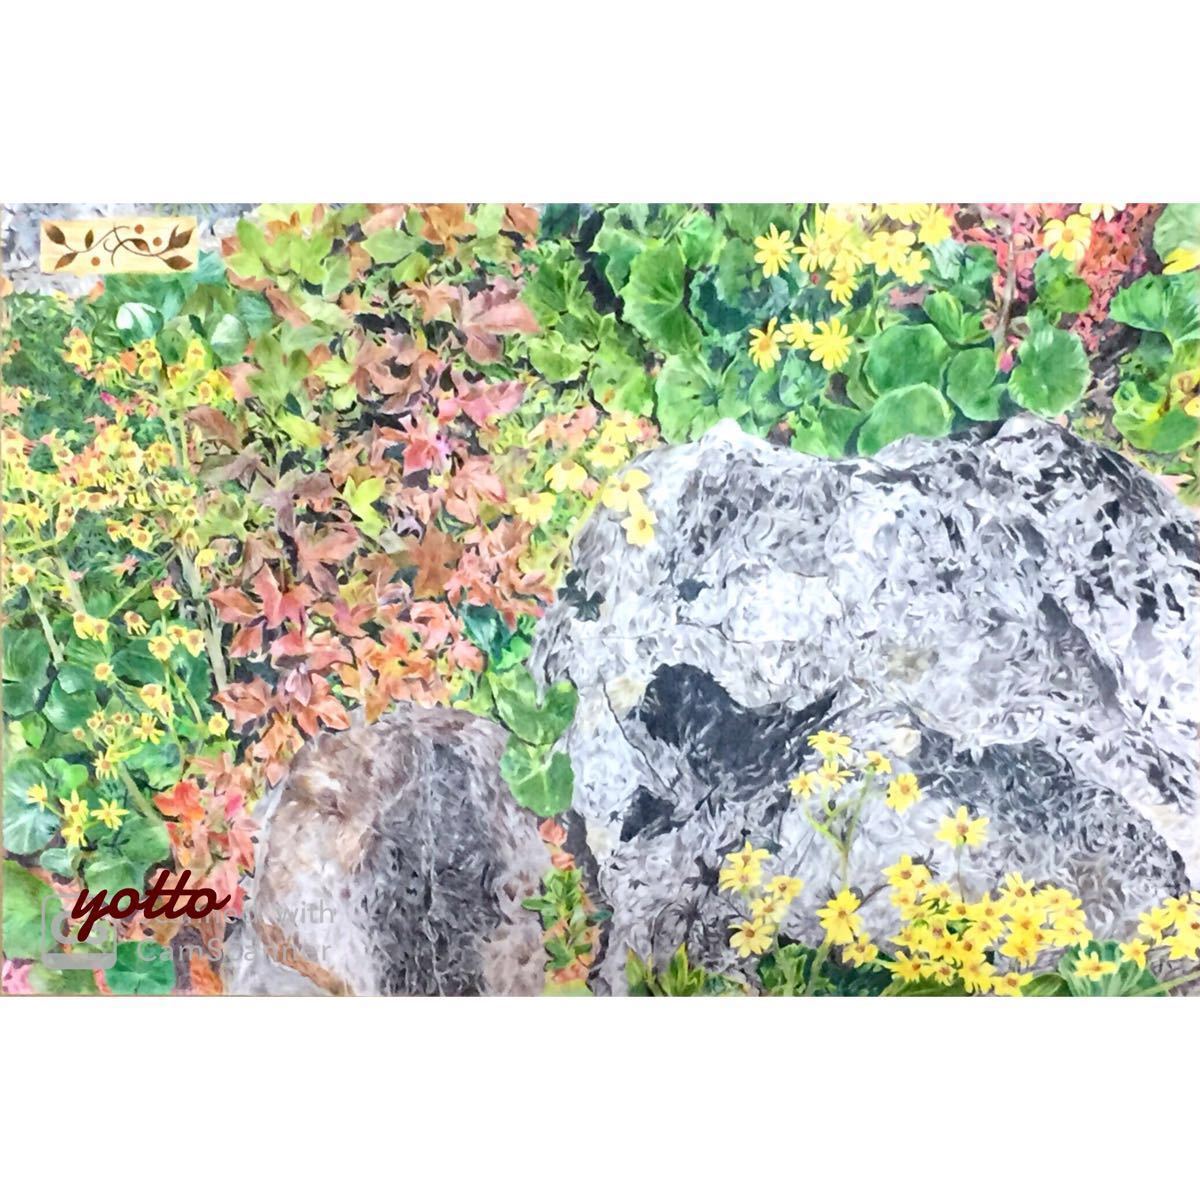 Colored pencil drawing Encounter A2, framed ◇◆Hand-drawn◇Original◆Landscape painting◇◆yotto ◇, Artwork, Painting, Pencil drawing, Charcoal drawing